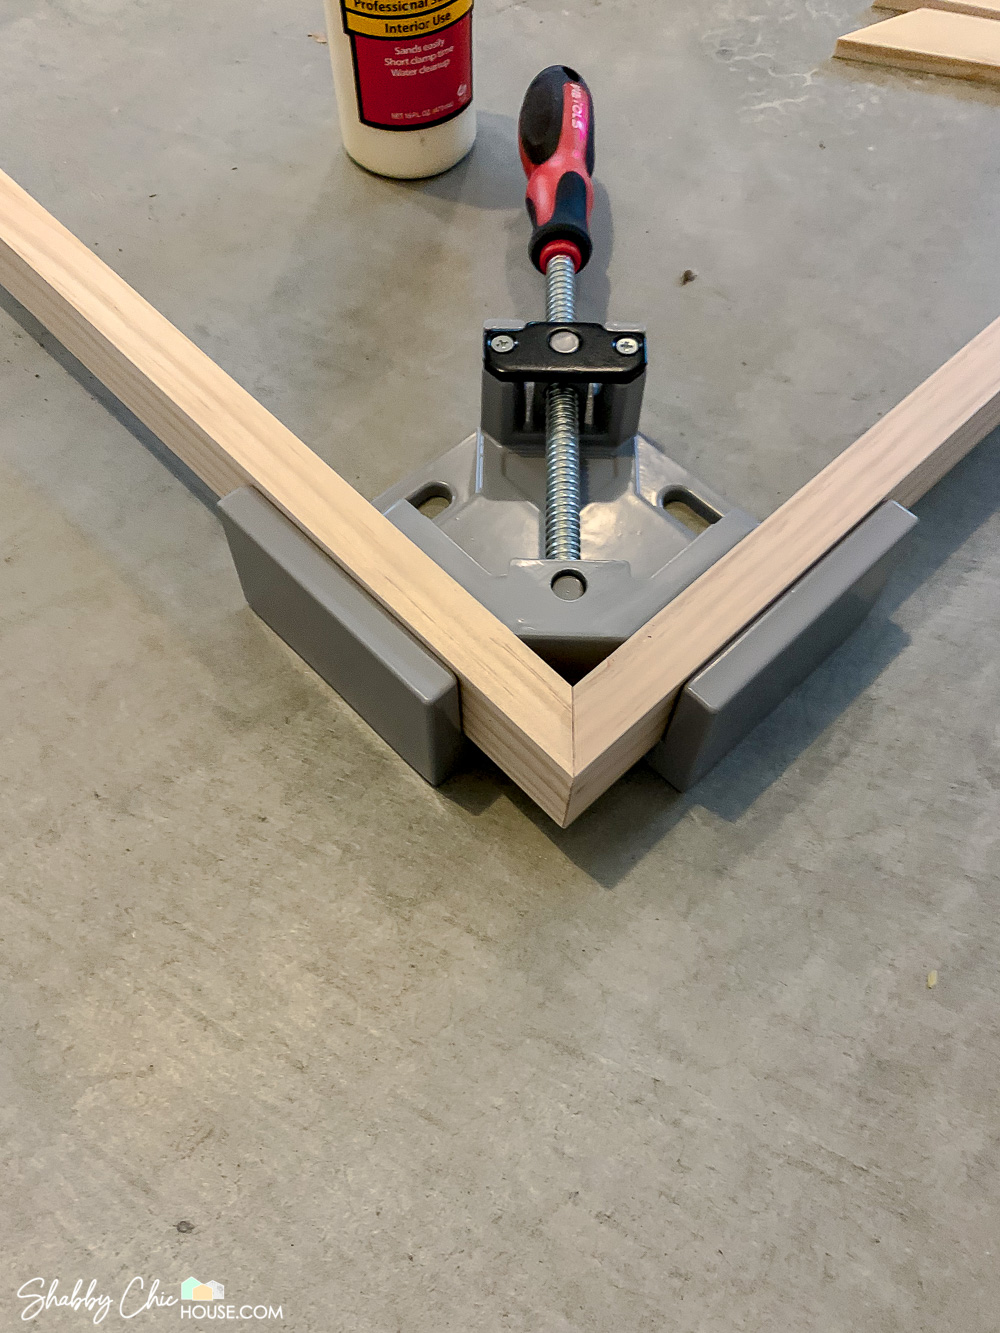 Close-up of a 90-degree wood working clamp being used to build a wooden DIY Floating Picture Frame.